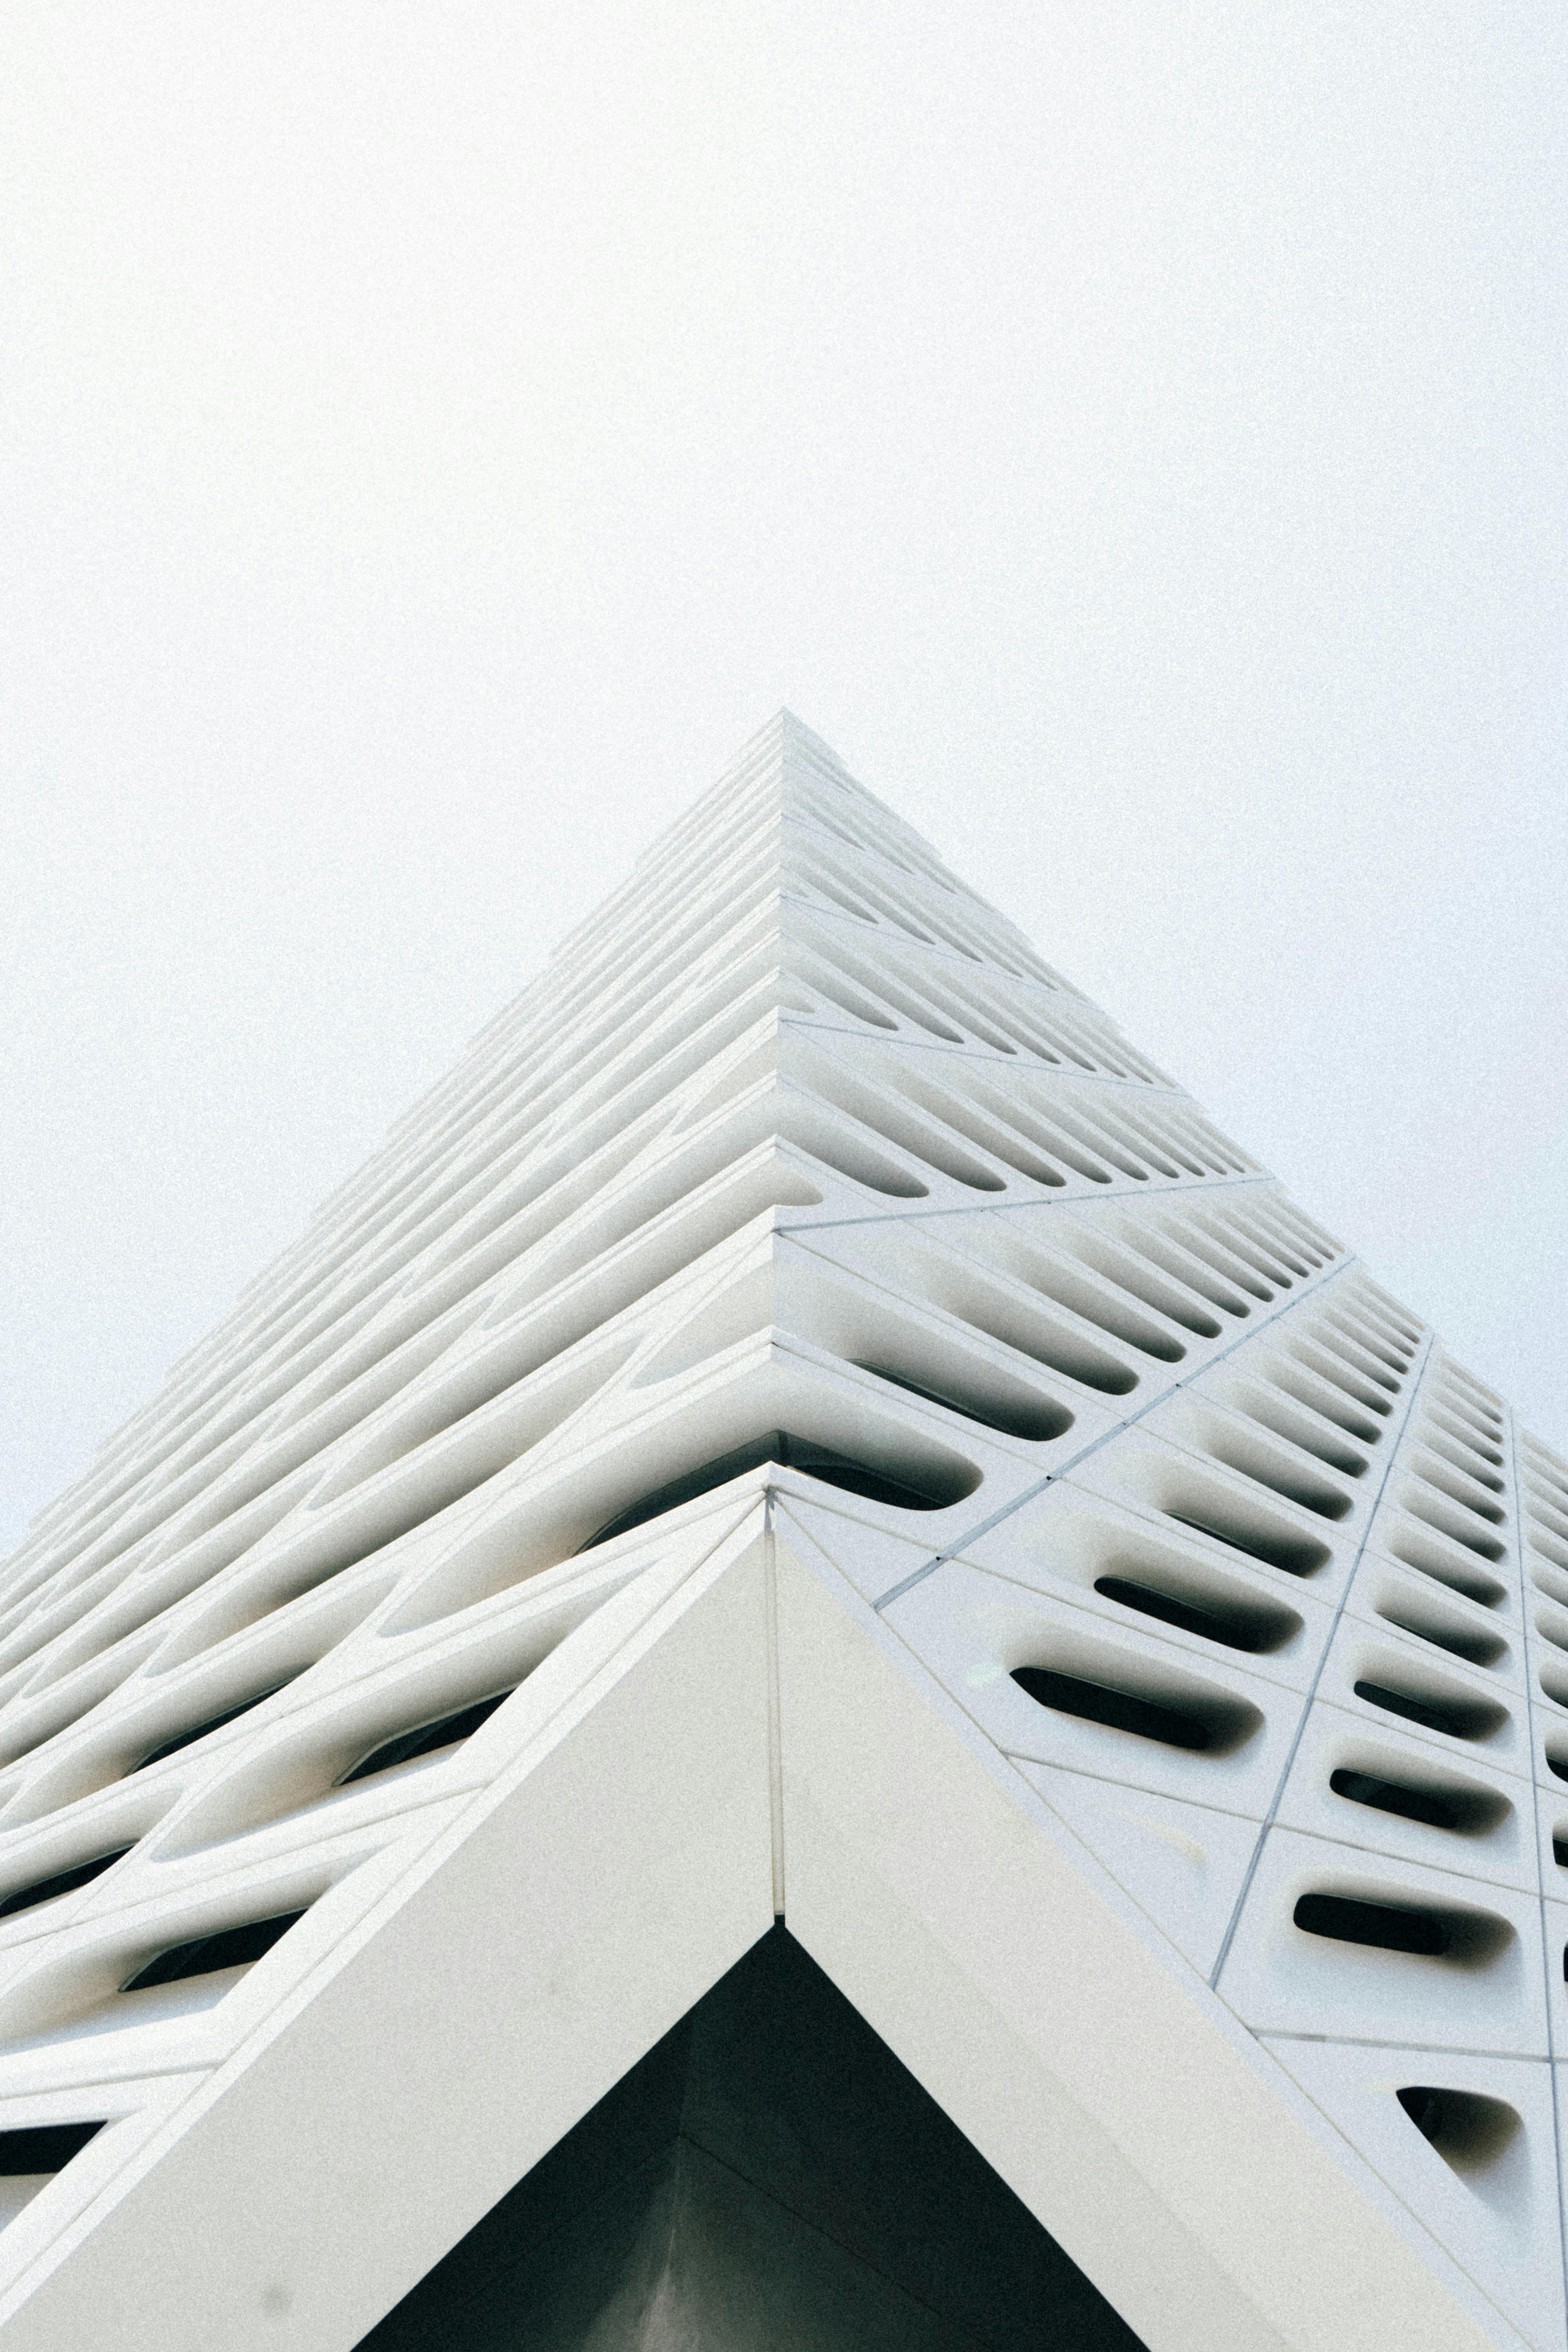 1000 Minimalist Architecture Pictures  Download Free Images on Unsplash